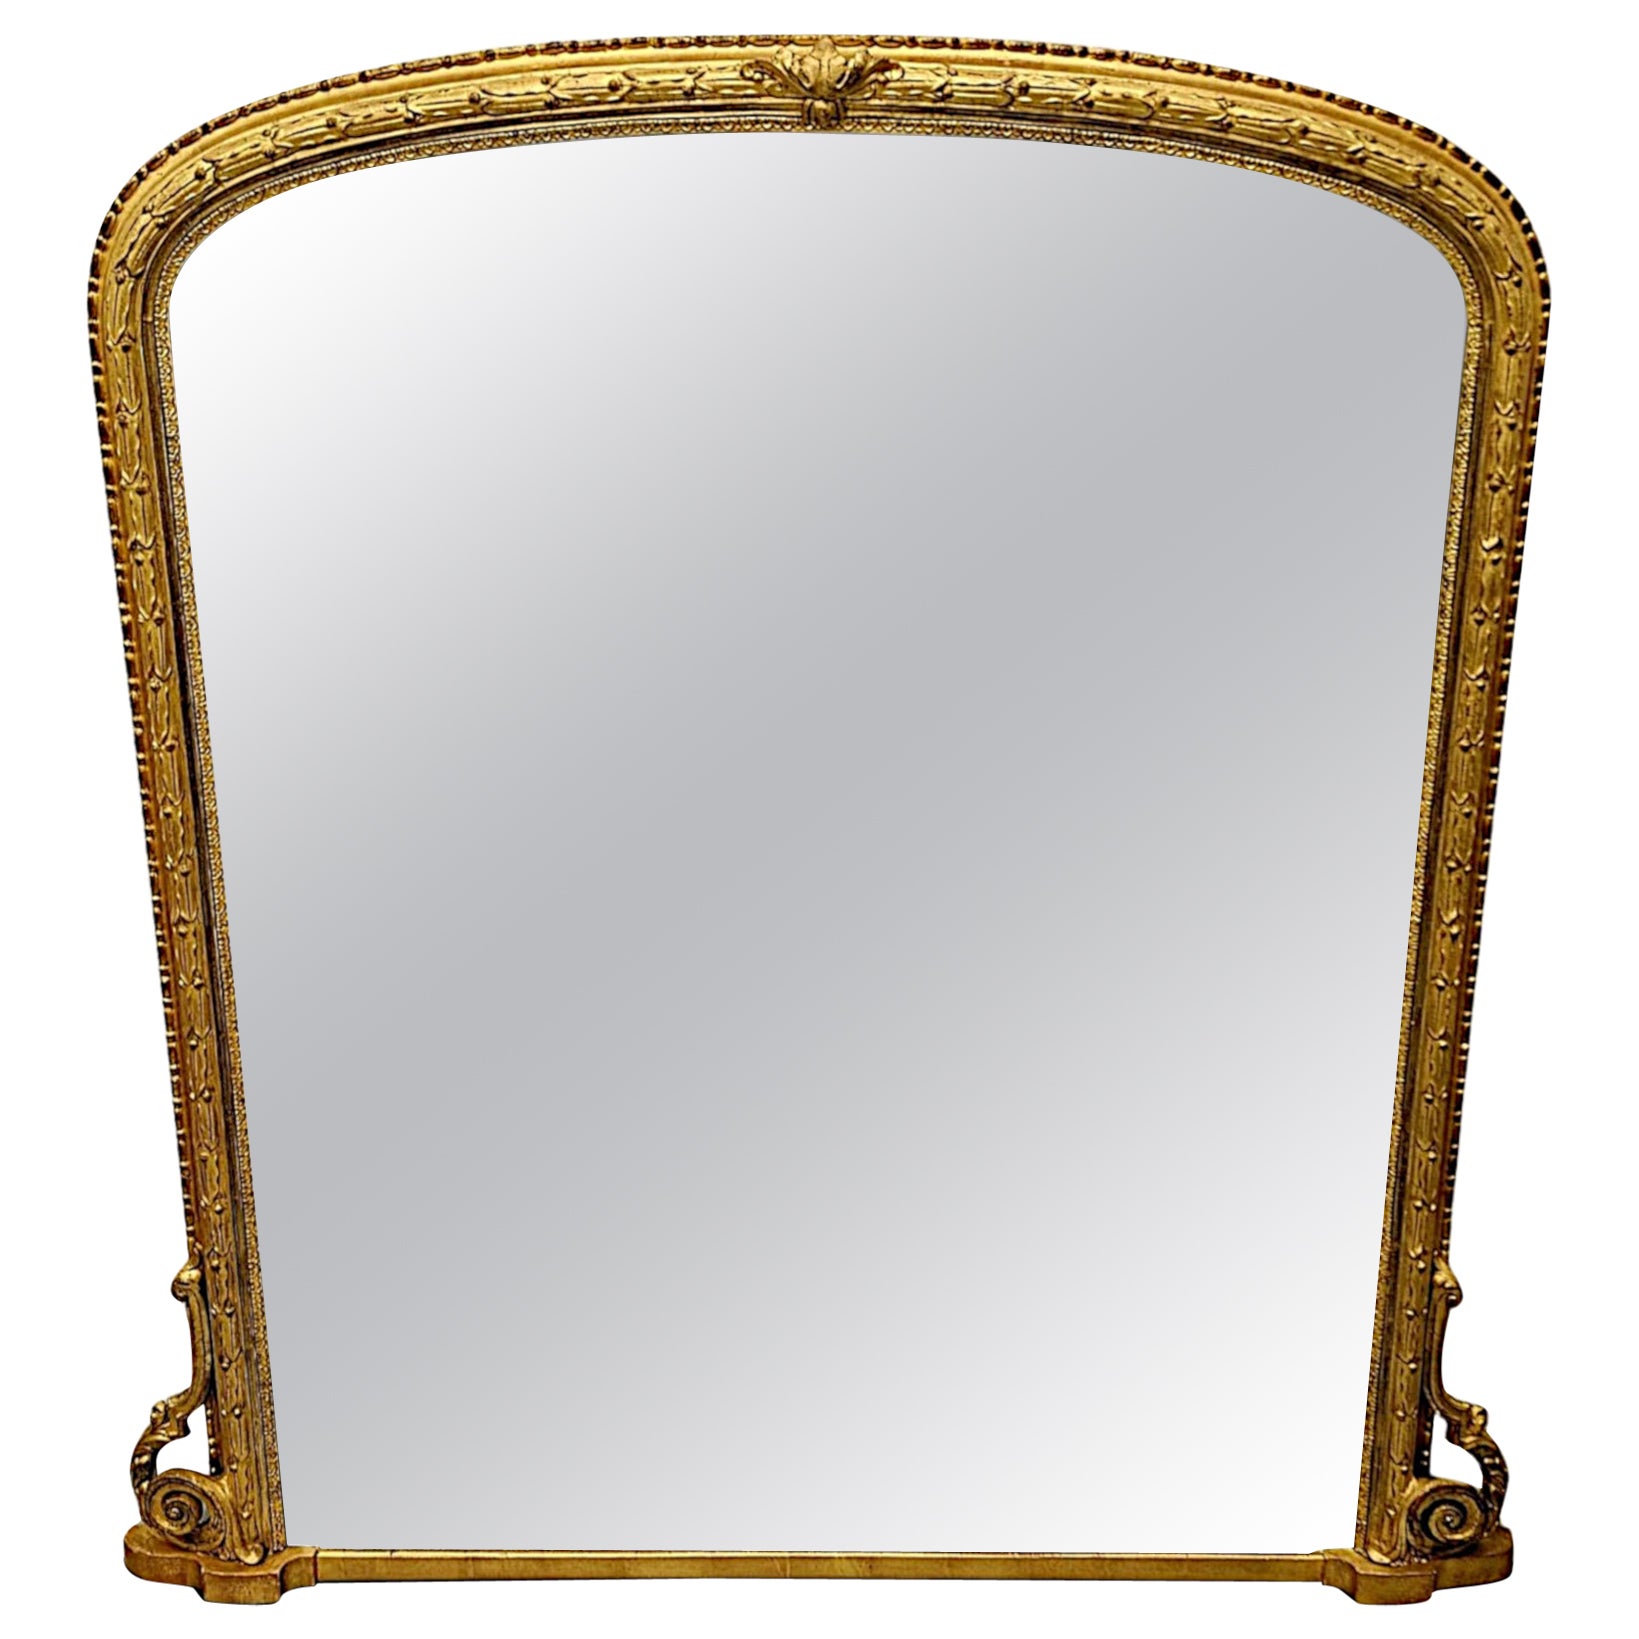 A Very Fine Large 19th Century Giltwood Overmantel Mirror For Sale